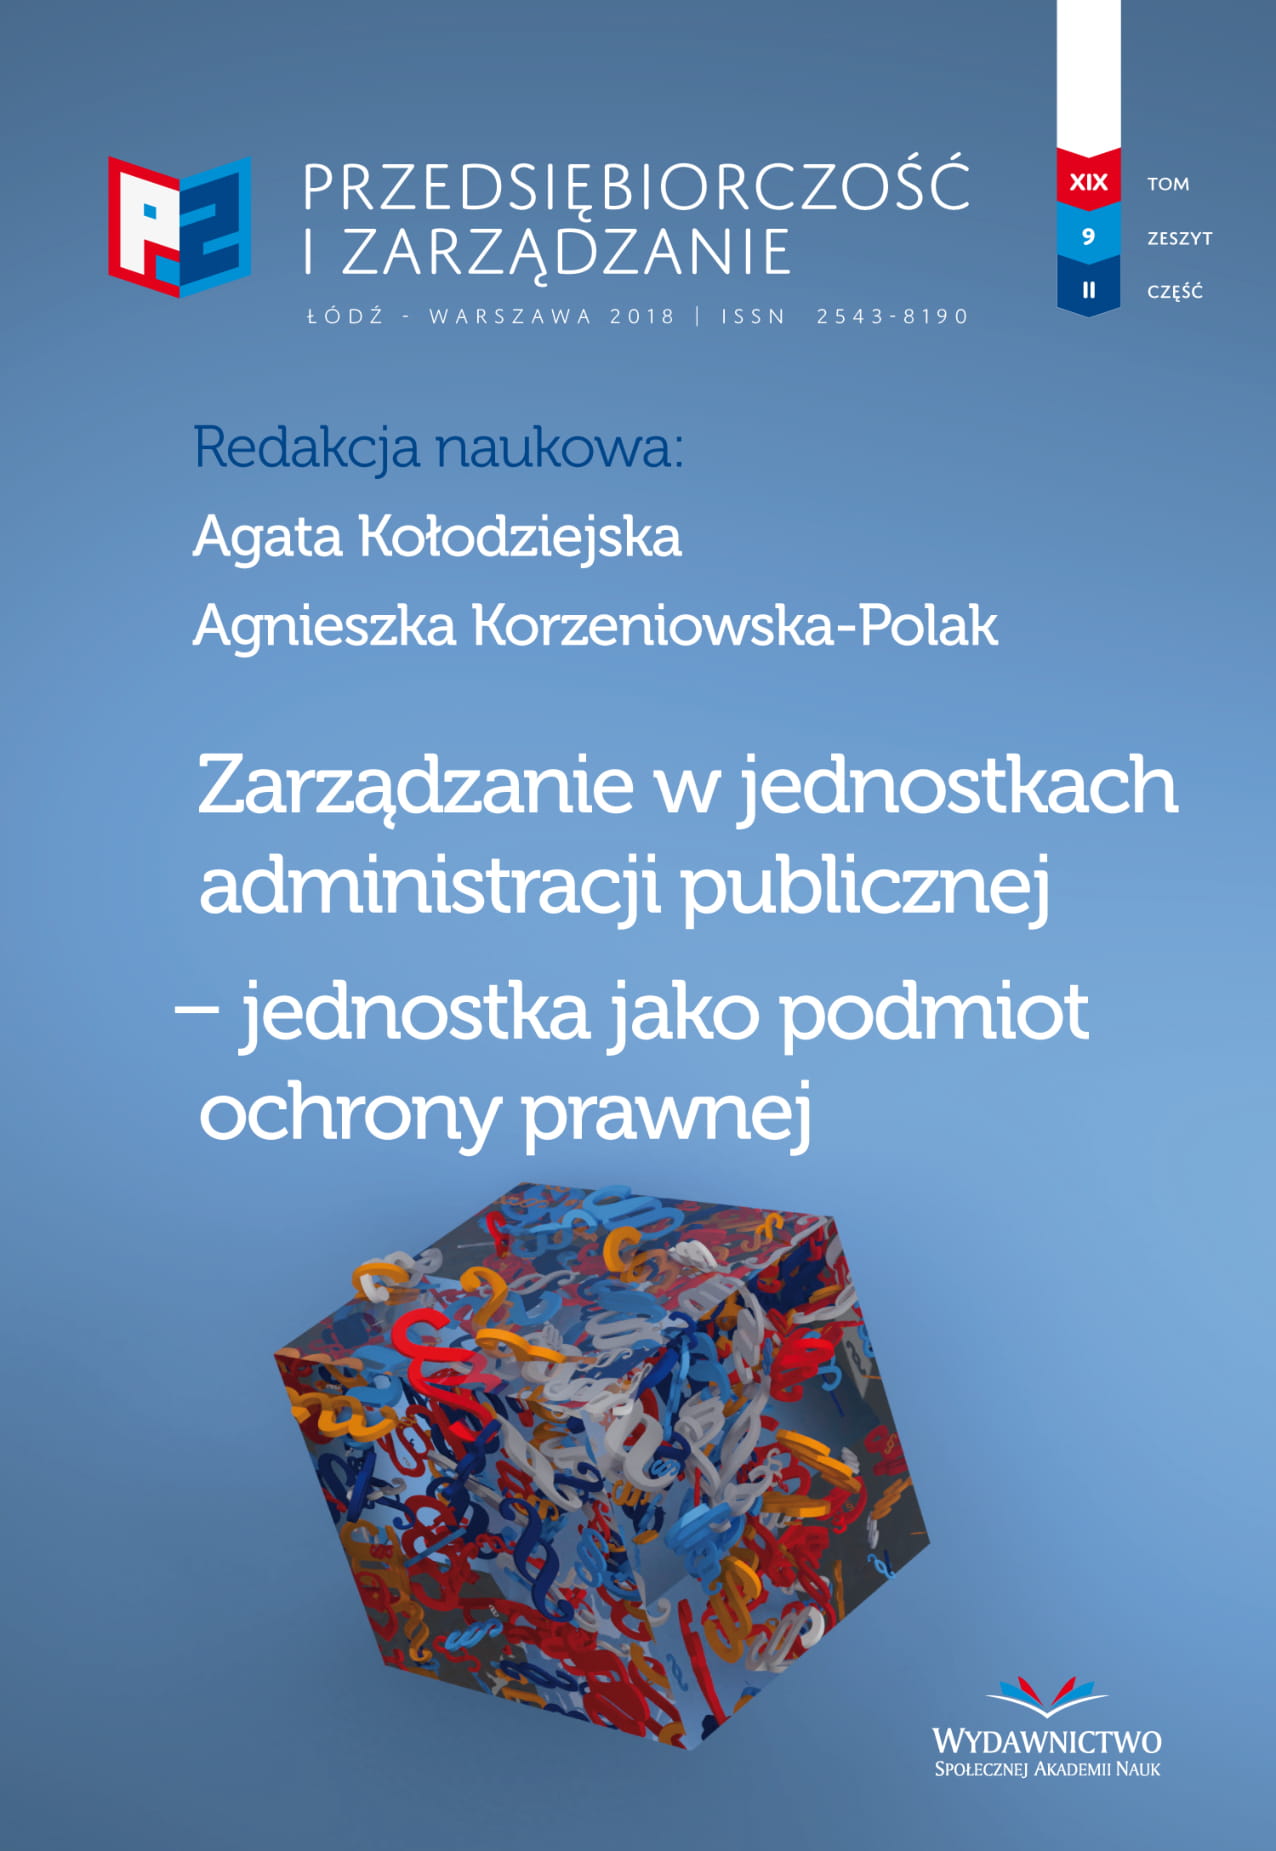 Conditions of Admissibility of Imposing Limitations Upon
the Exercise of Constitutional Freedoms and Rights Based on Art. 31 Para. 3 of the Constitution of the Republic of Poland of 2nd April 1997 Cover Image